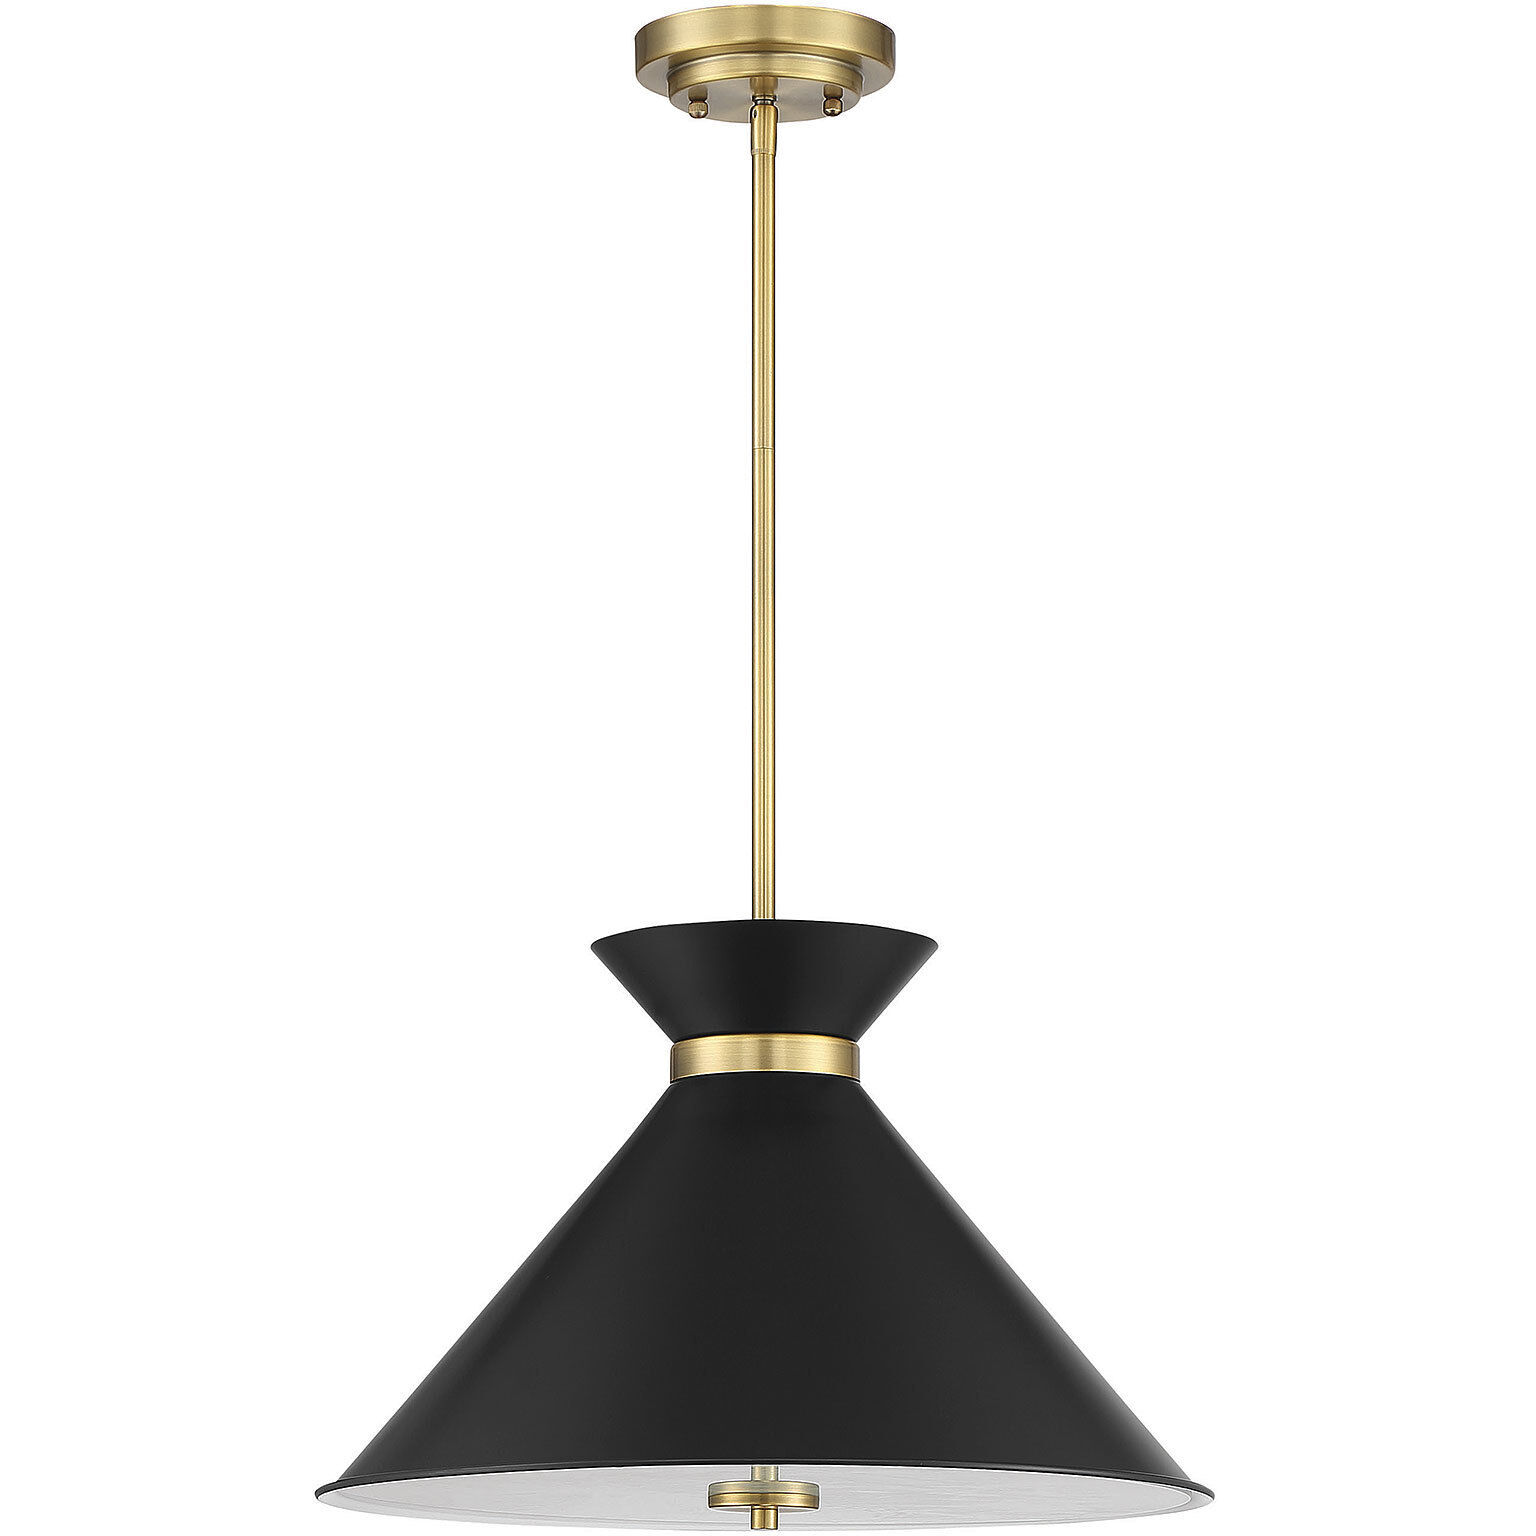 Lamar 3 Light 18 inch Black with Warm Brass Accents Pendant Ceiling Light